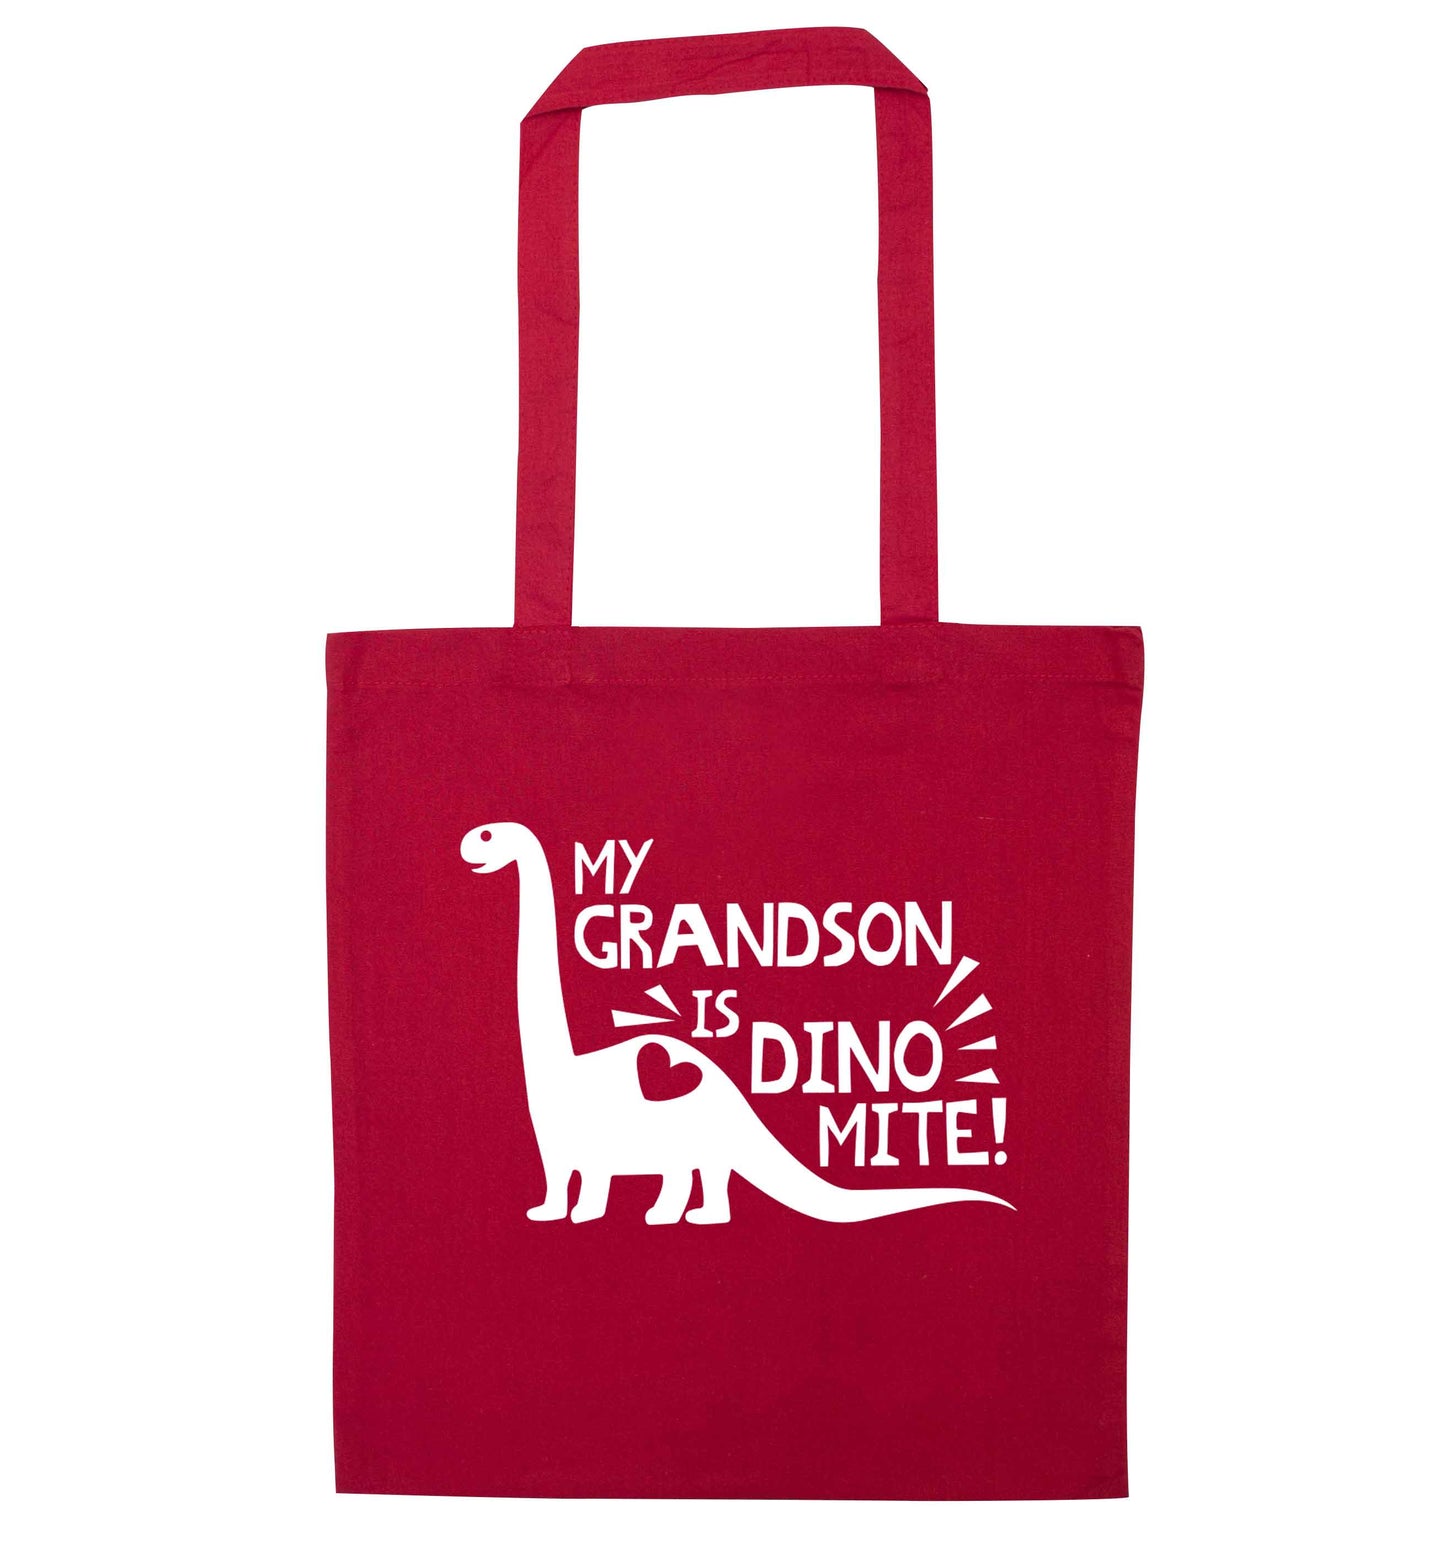 My grandson is dinomite! red tote bag